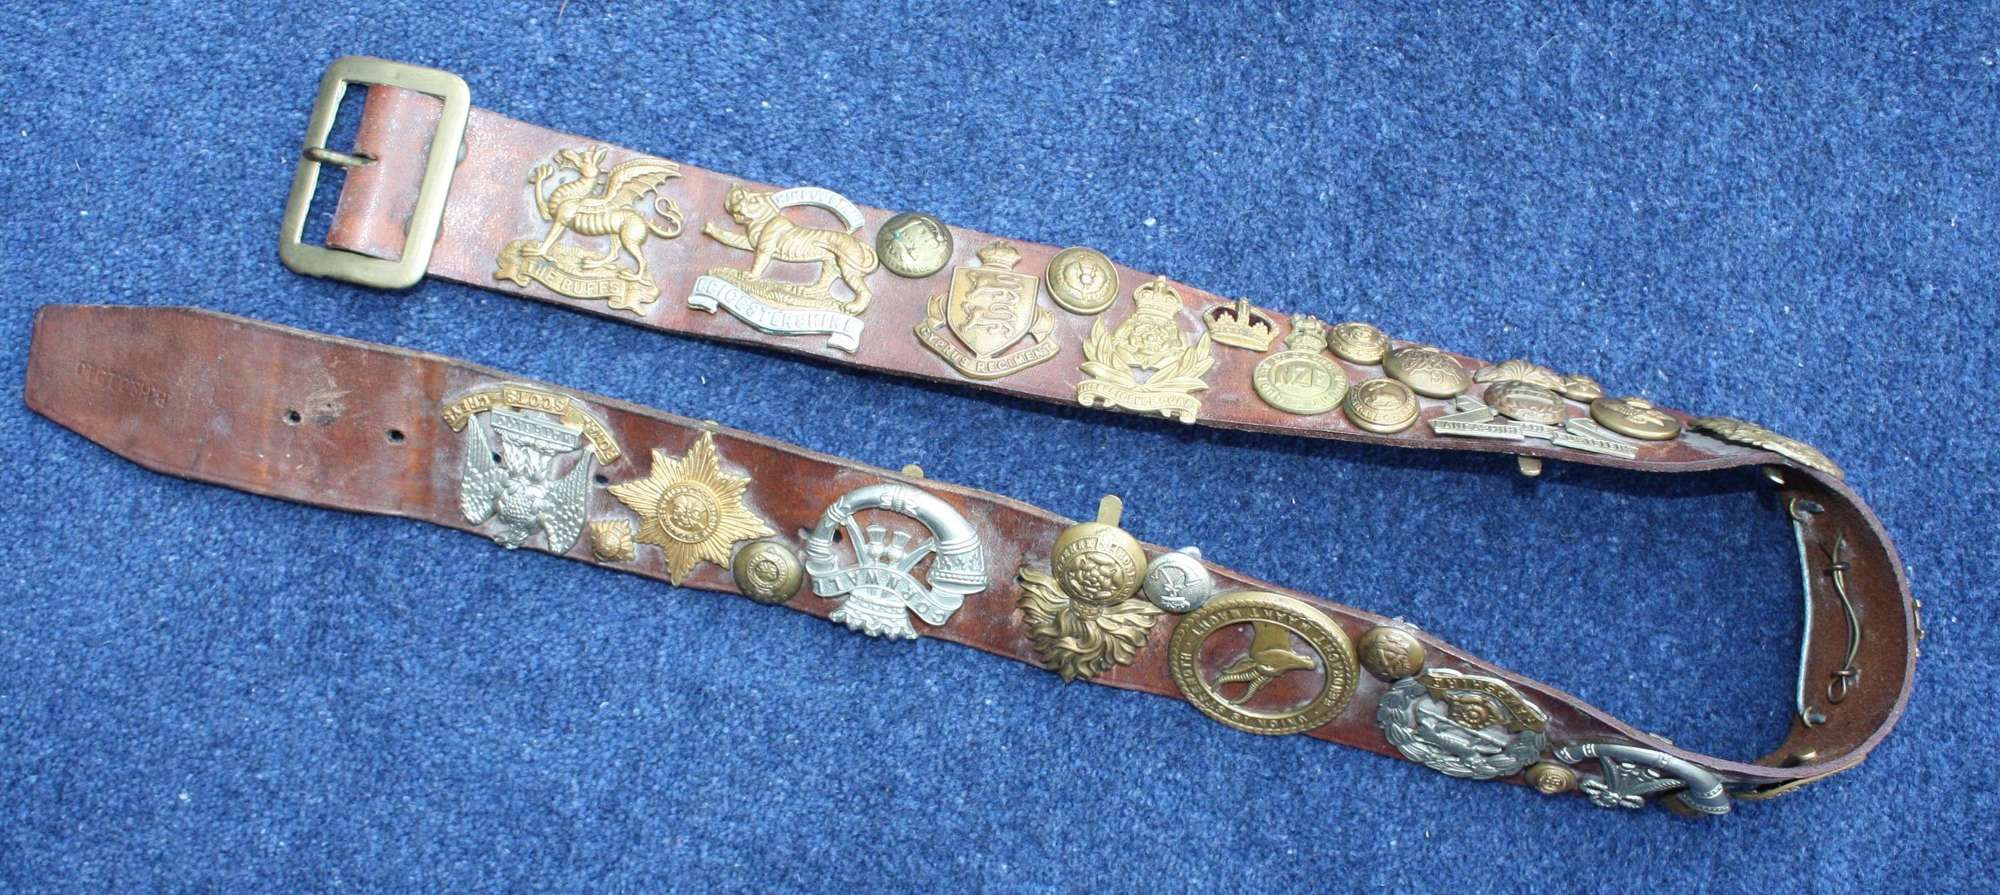 Original British Army 1903 Pattern Leather 'Hate' Belt with Cap Badges